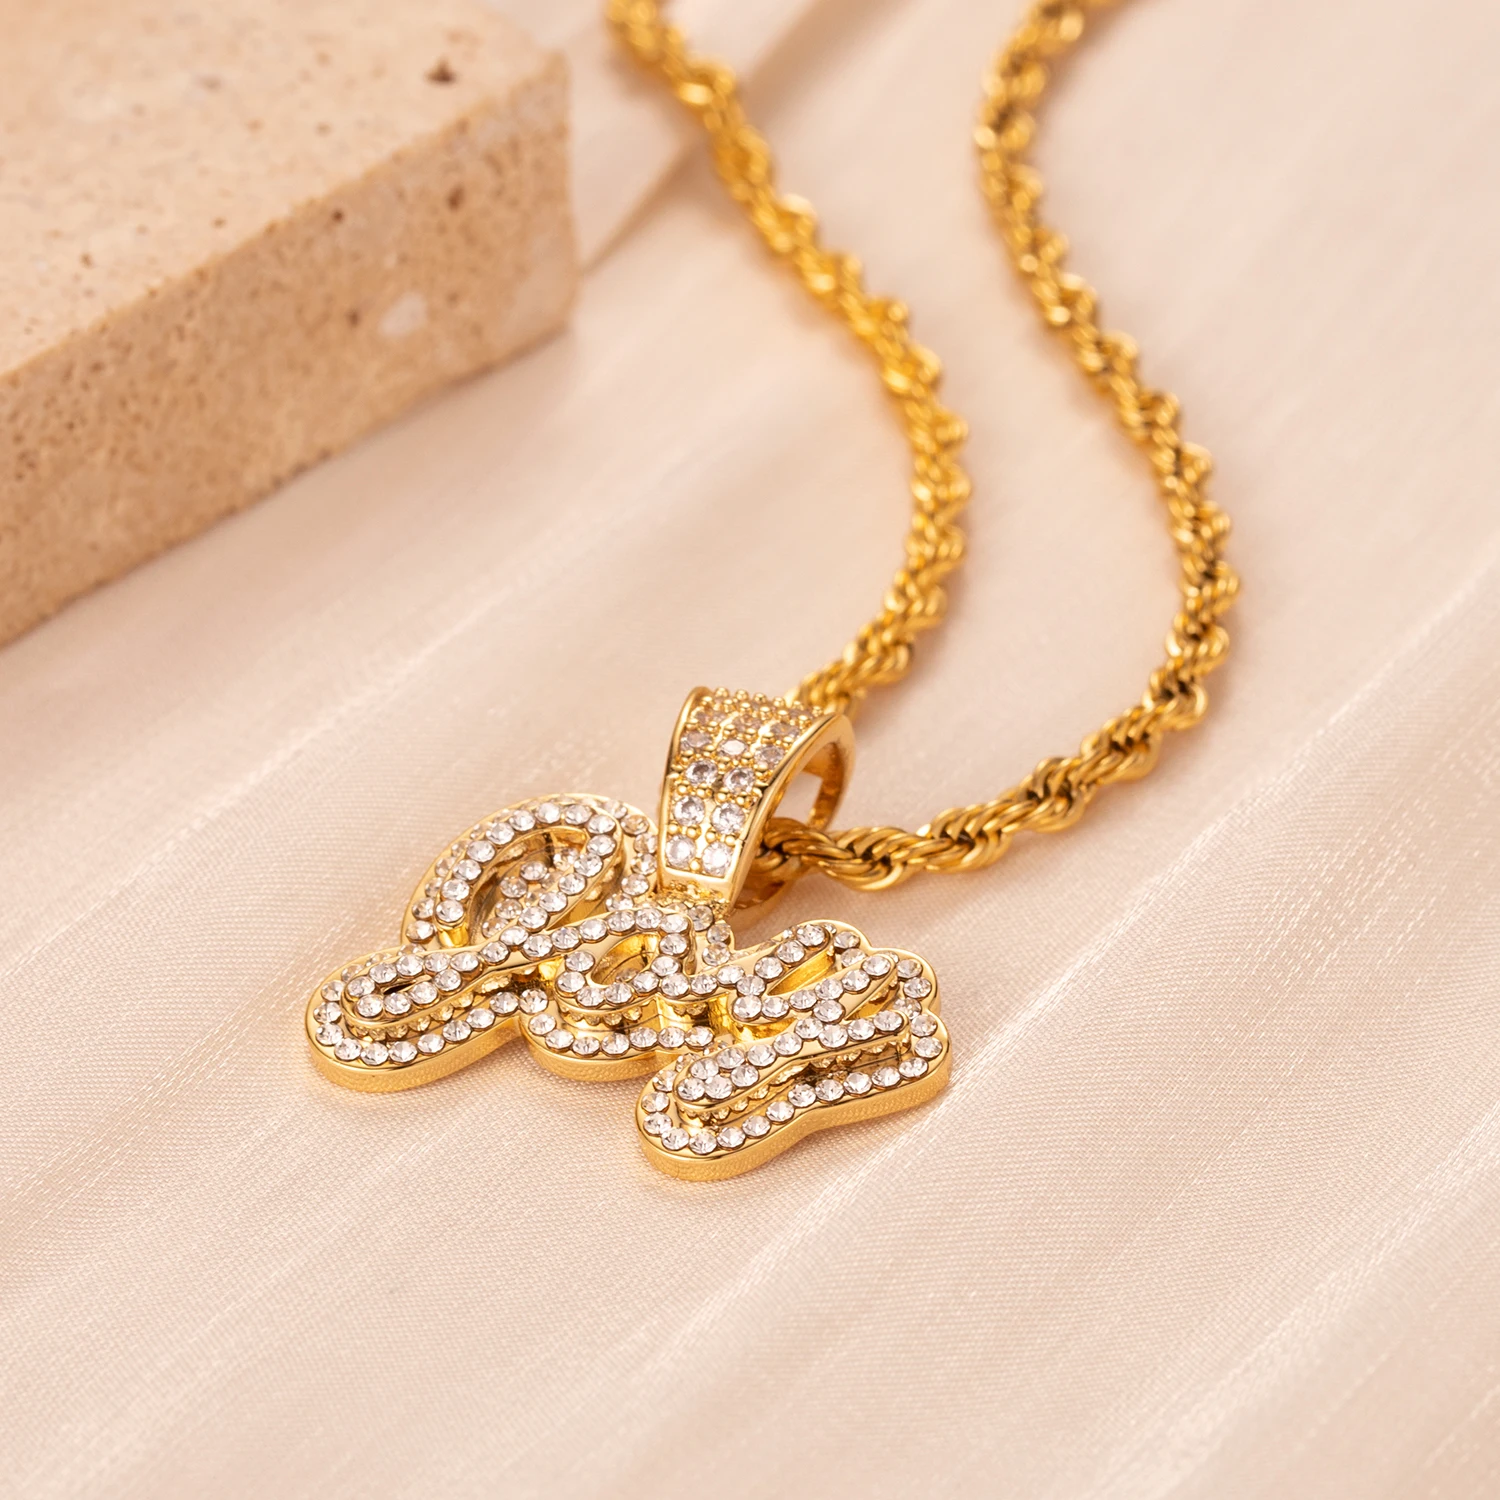 Dainty Gold Initial Necklace Two or More Discs - Lulu + Belle Jewellery